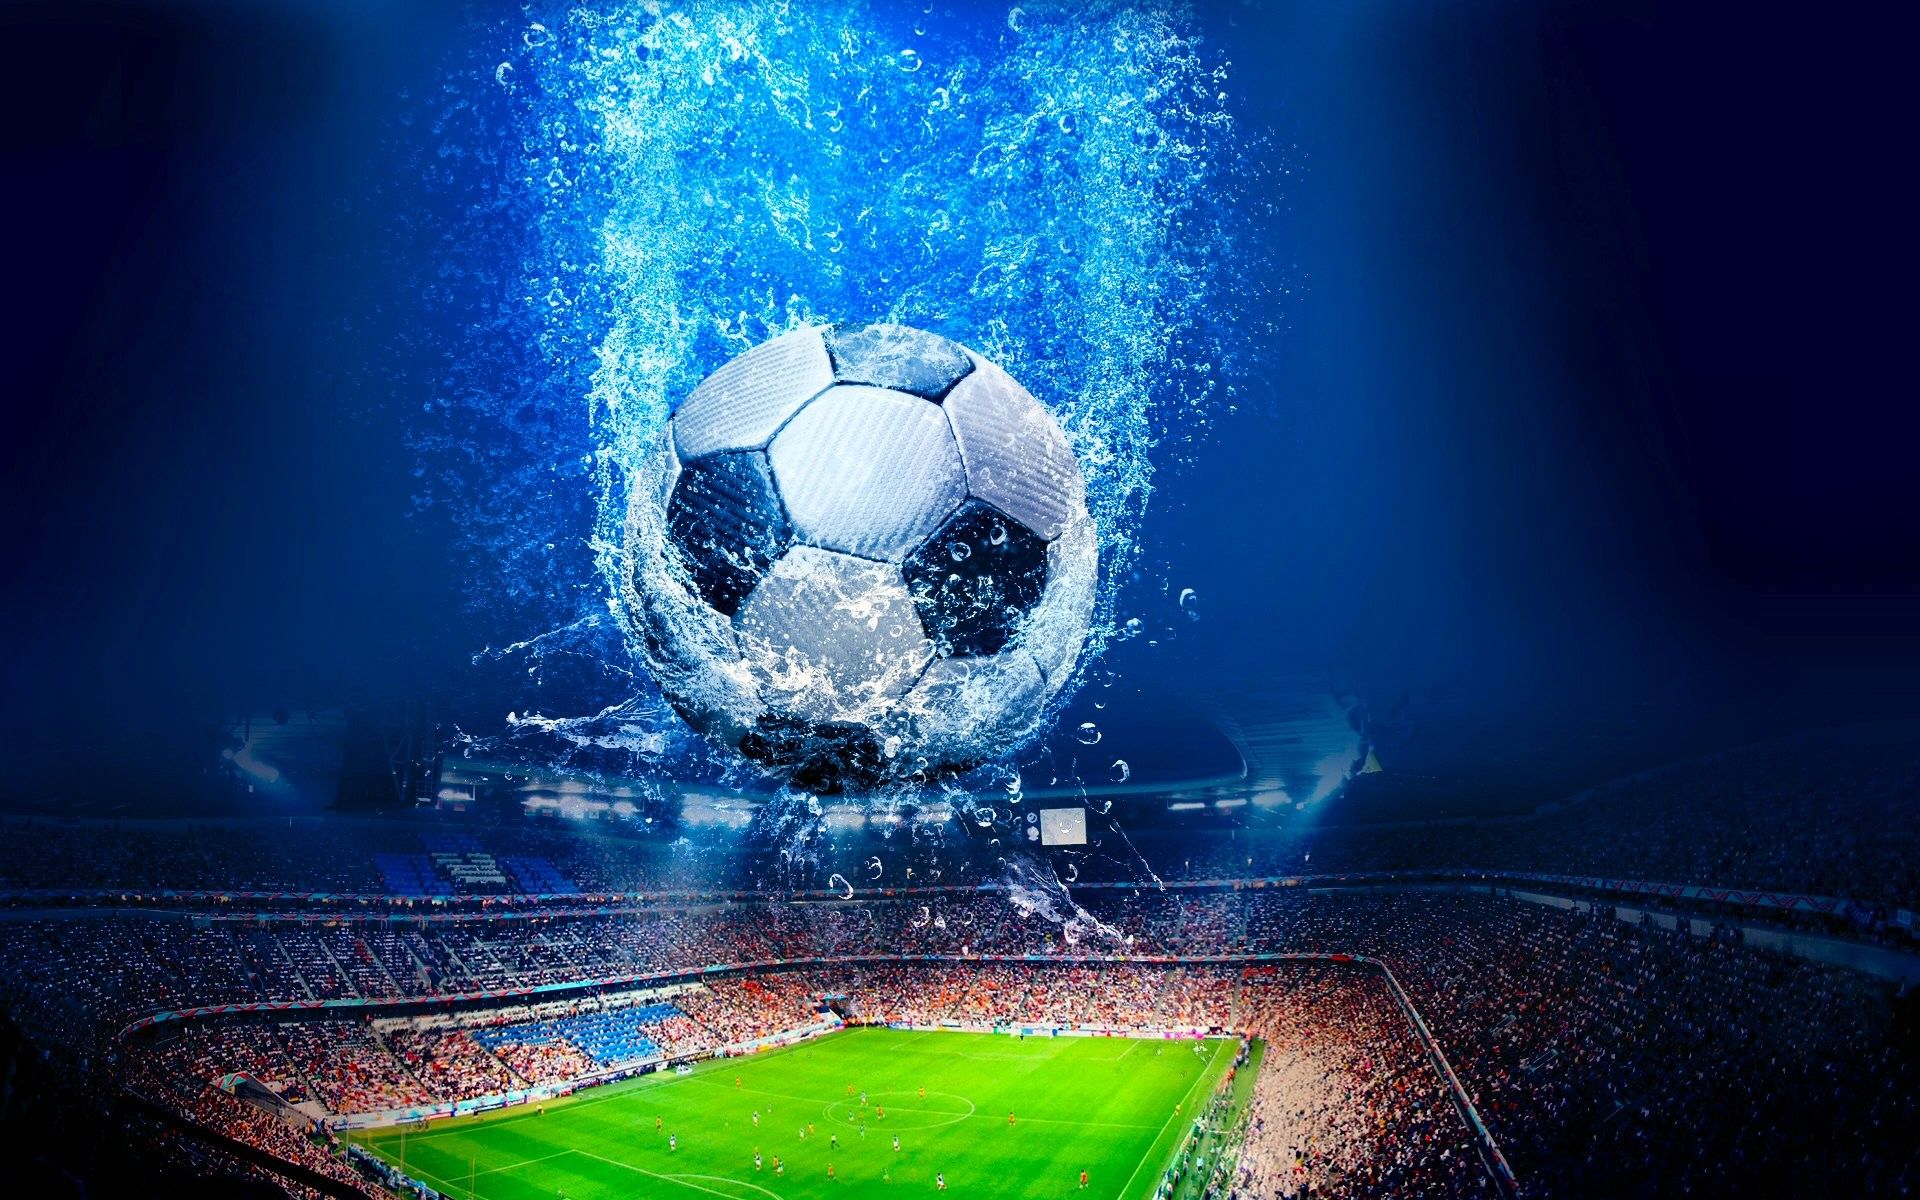 Wallpaper, digital art, water, sky, sphere, Earth, world, soccer ball, structure, football, graphics, 1920x1200 px, computer wallpaper, atmosphere of earth, sport venue 1920x1200